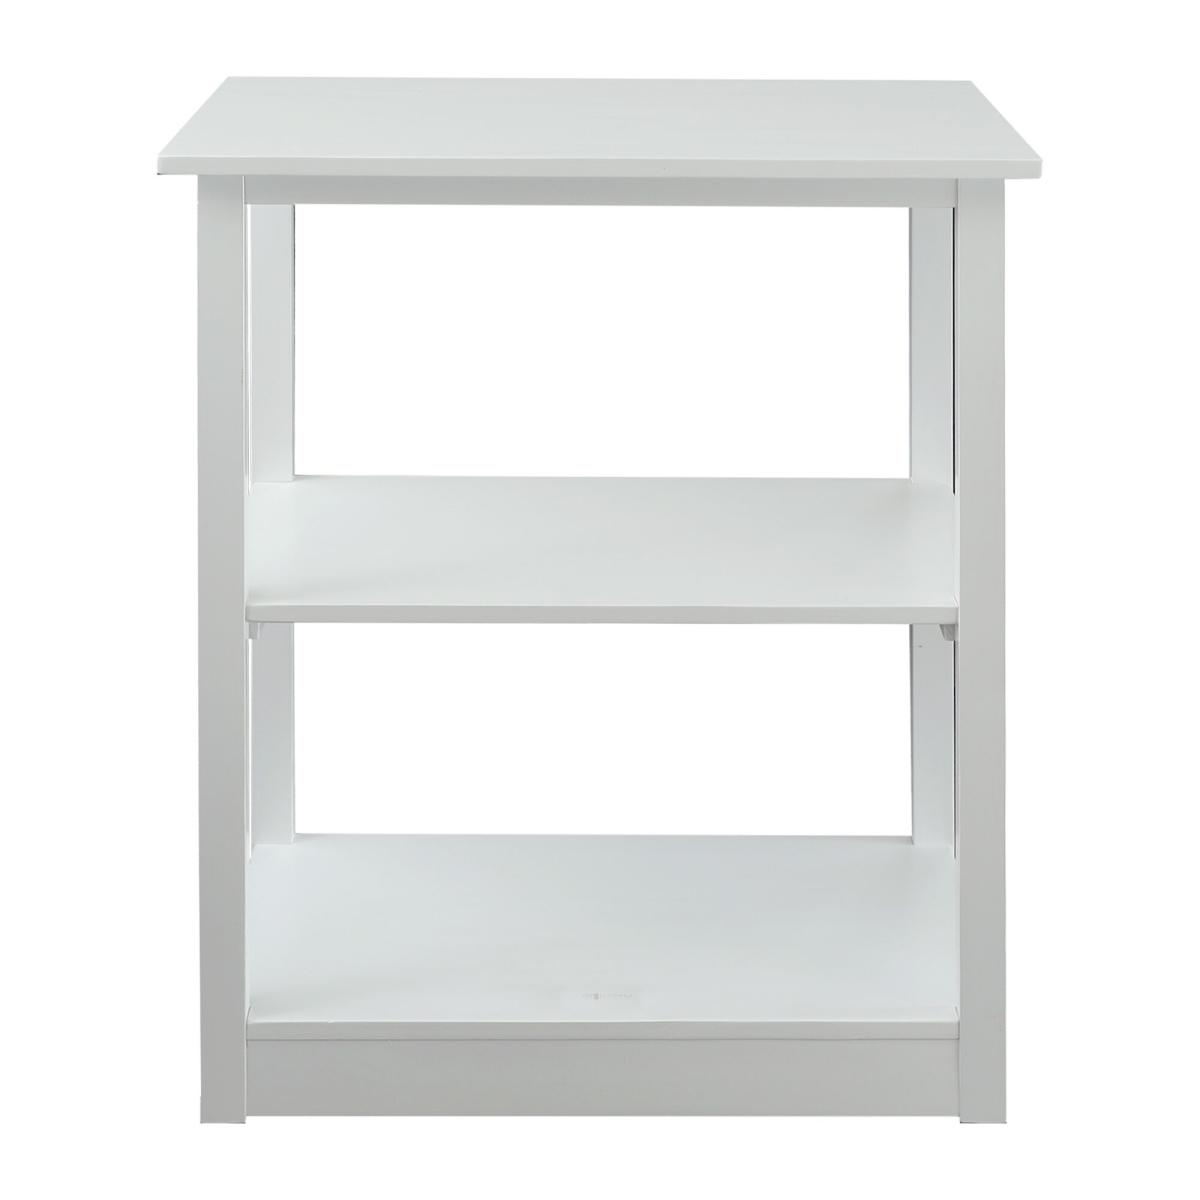 Picture of Casual Home 615-41 Adams 3-Shelf Bookcase with Concealed Sliding Track, Concealment Furniture - White